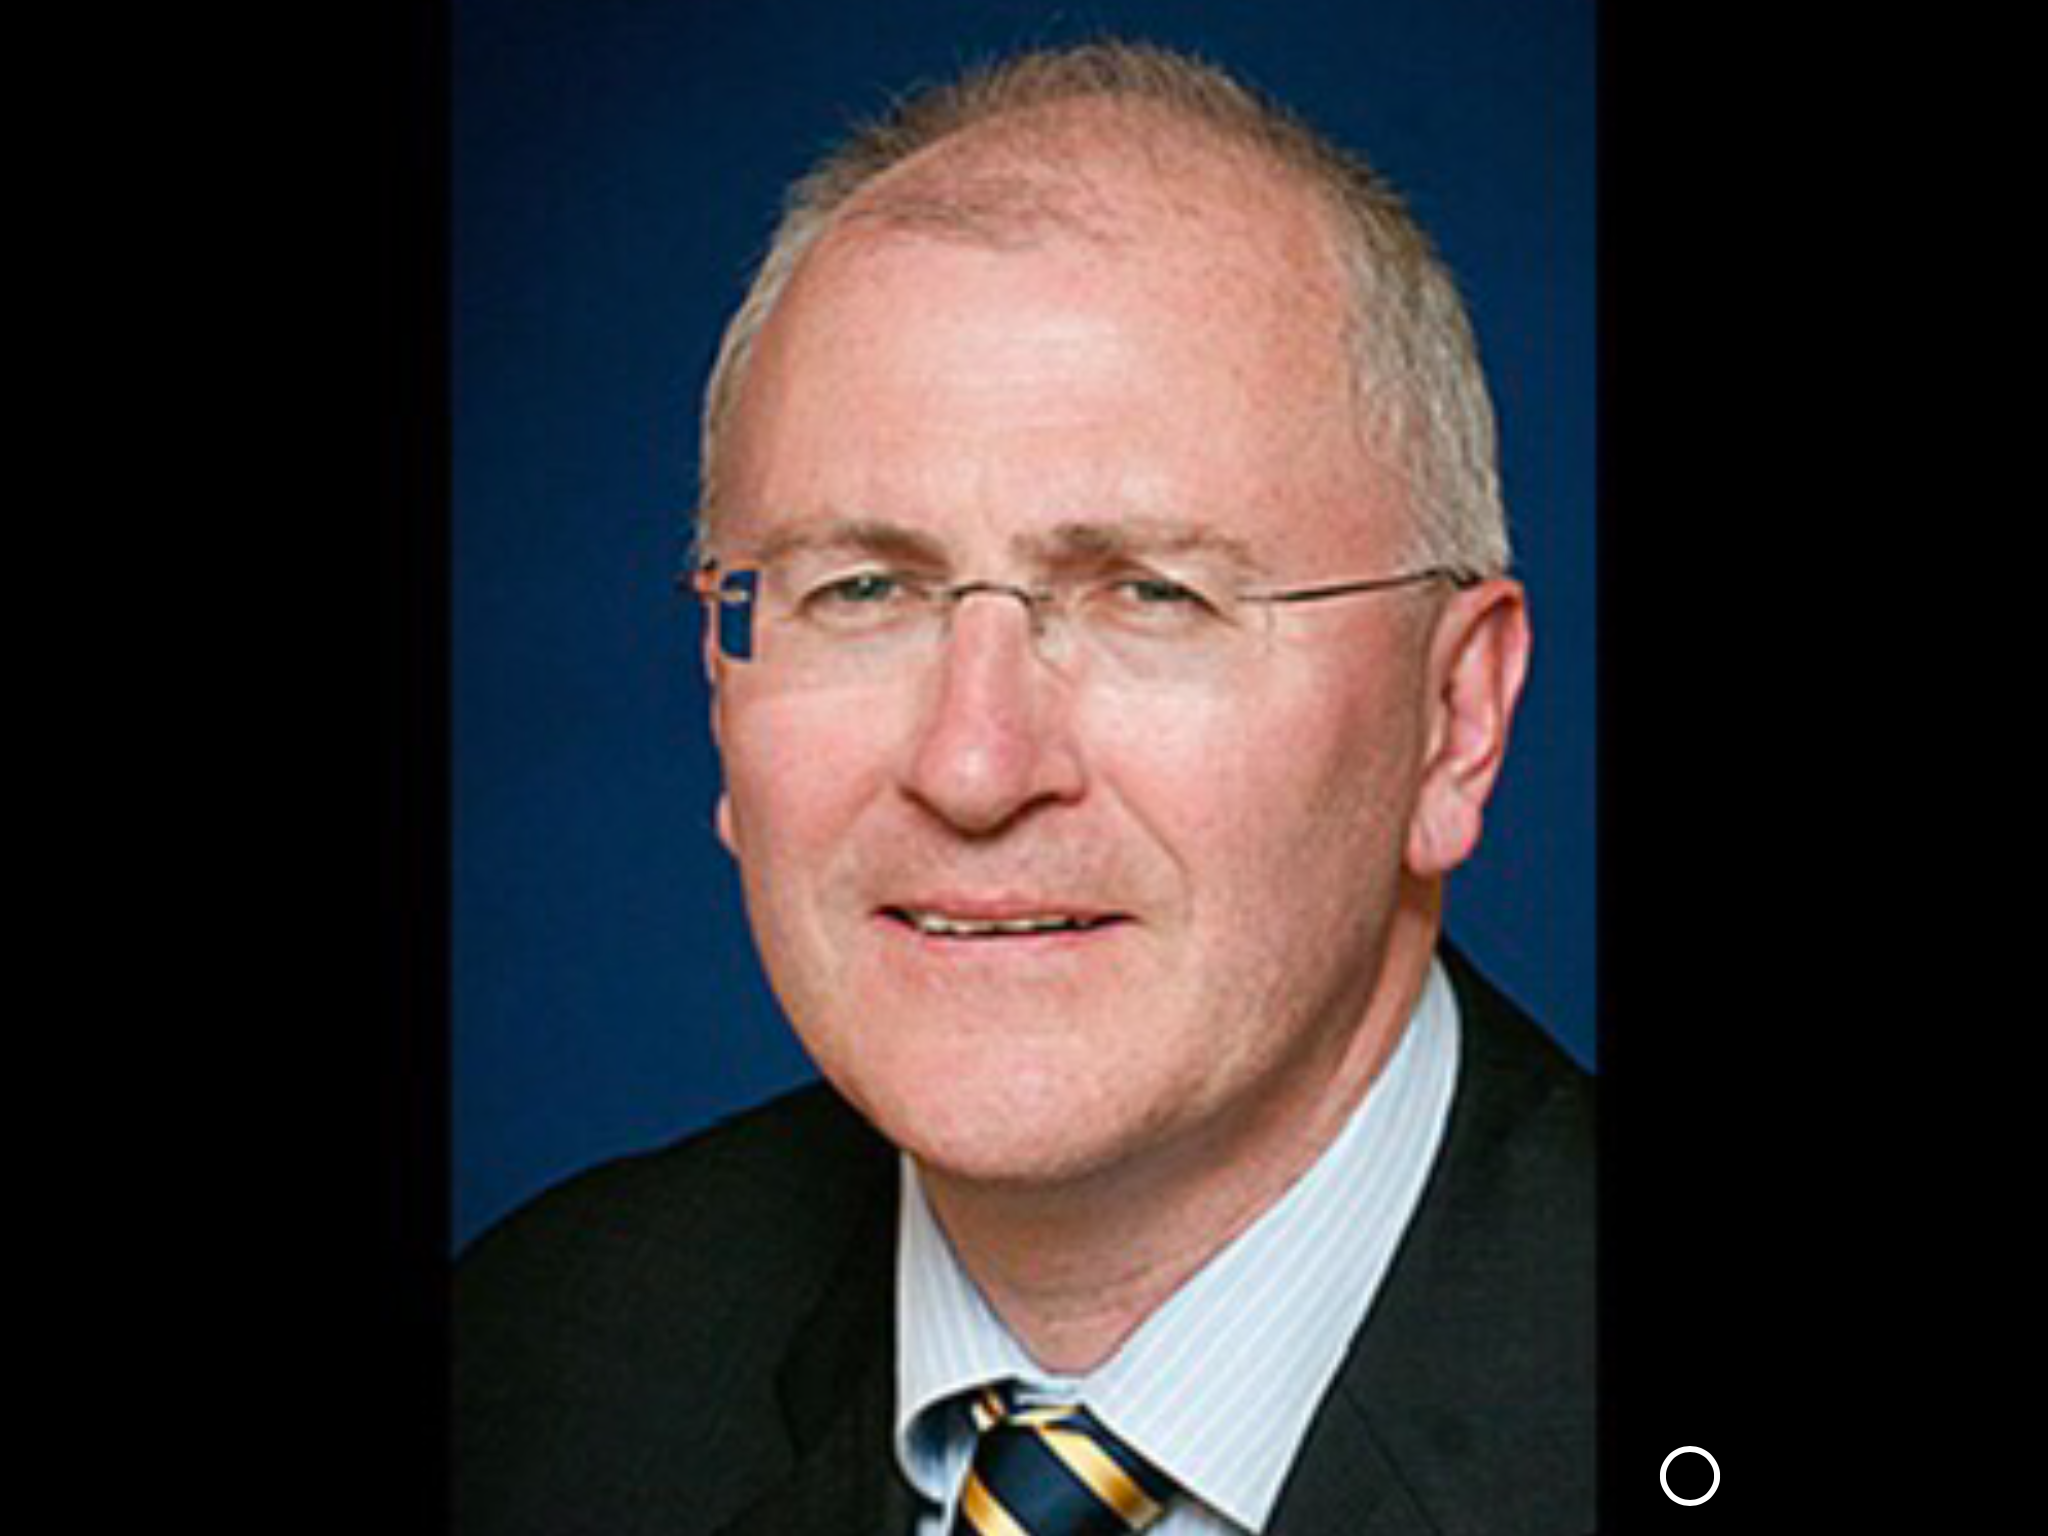 Prof Ray Walley, GP and Associate Clinical Professor of General Practice, UCD